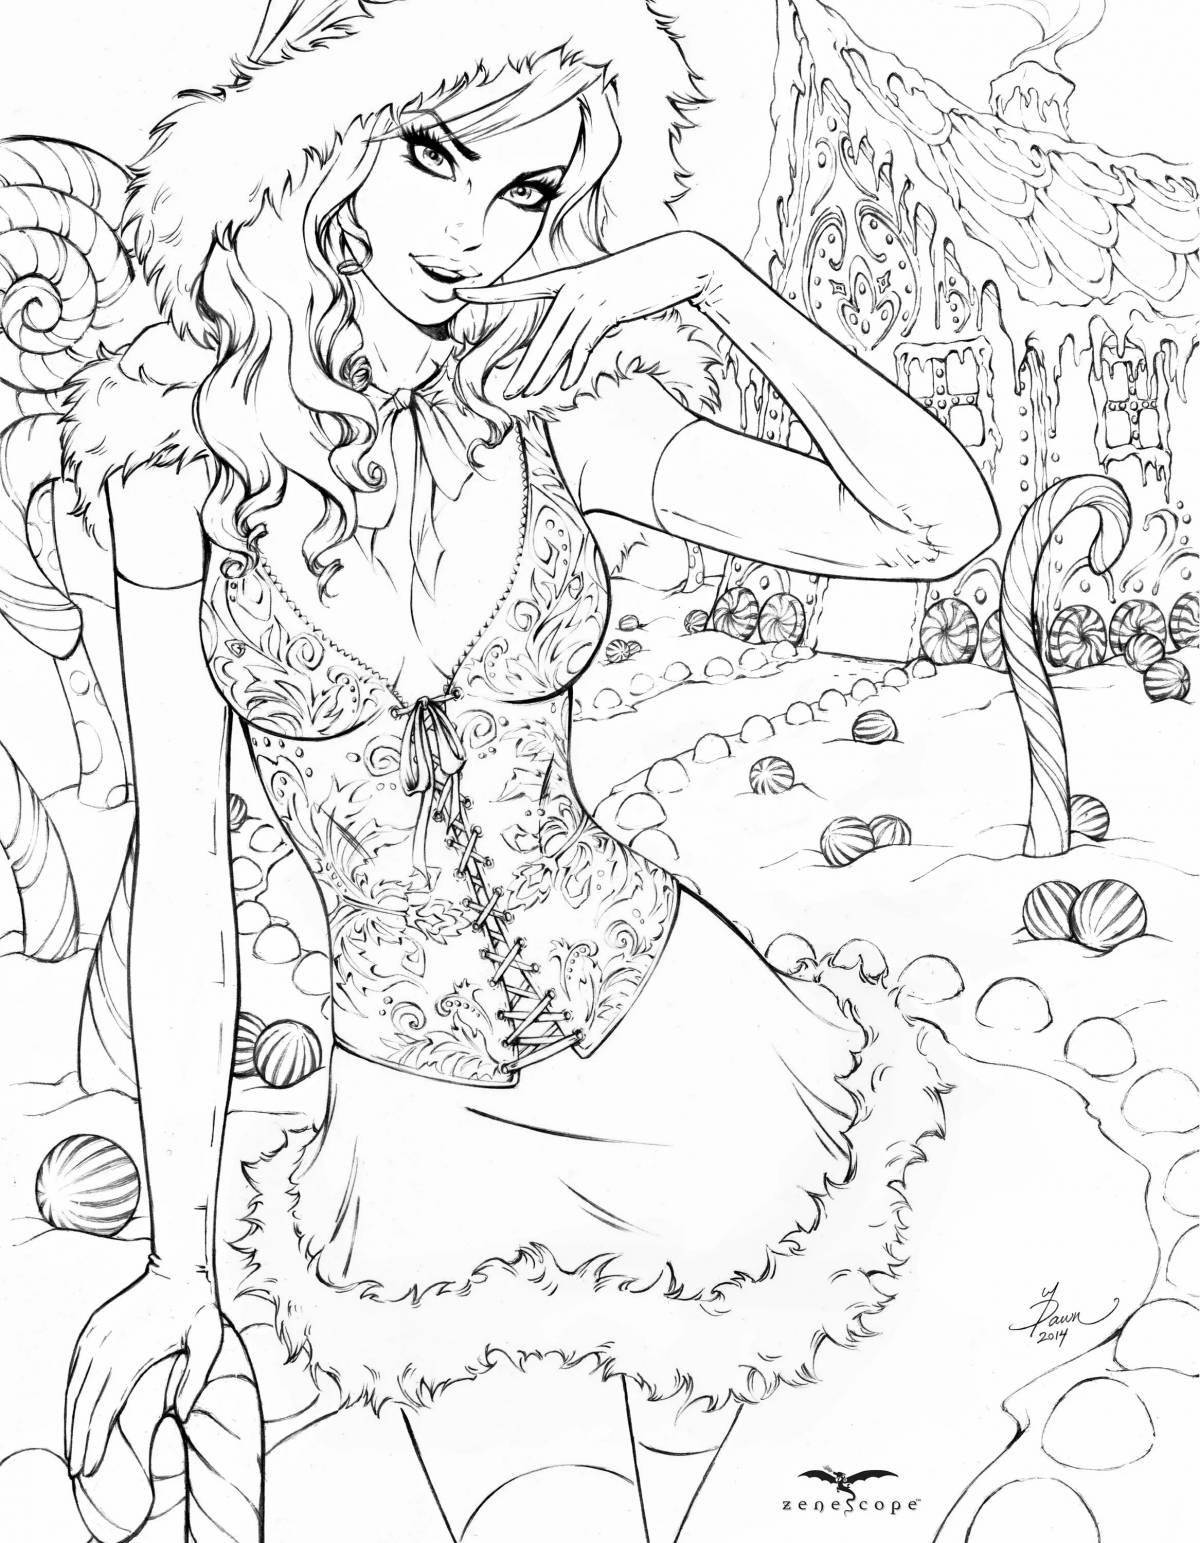 Colorful adult porn coloring page